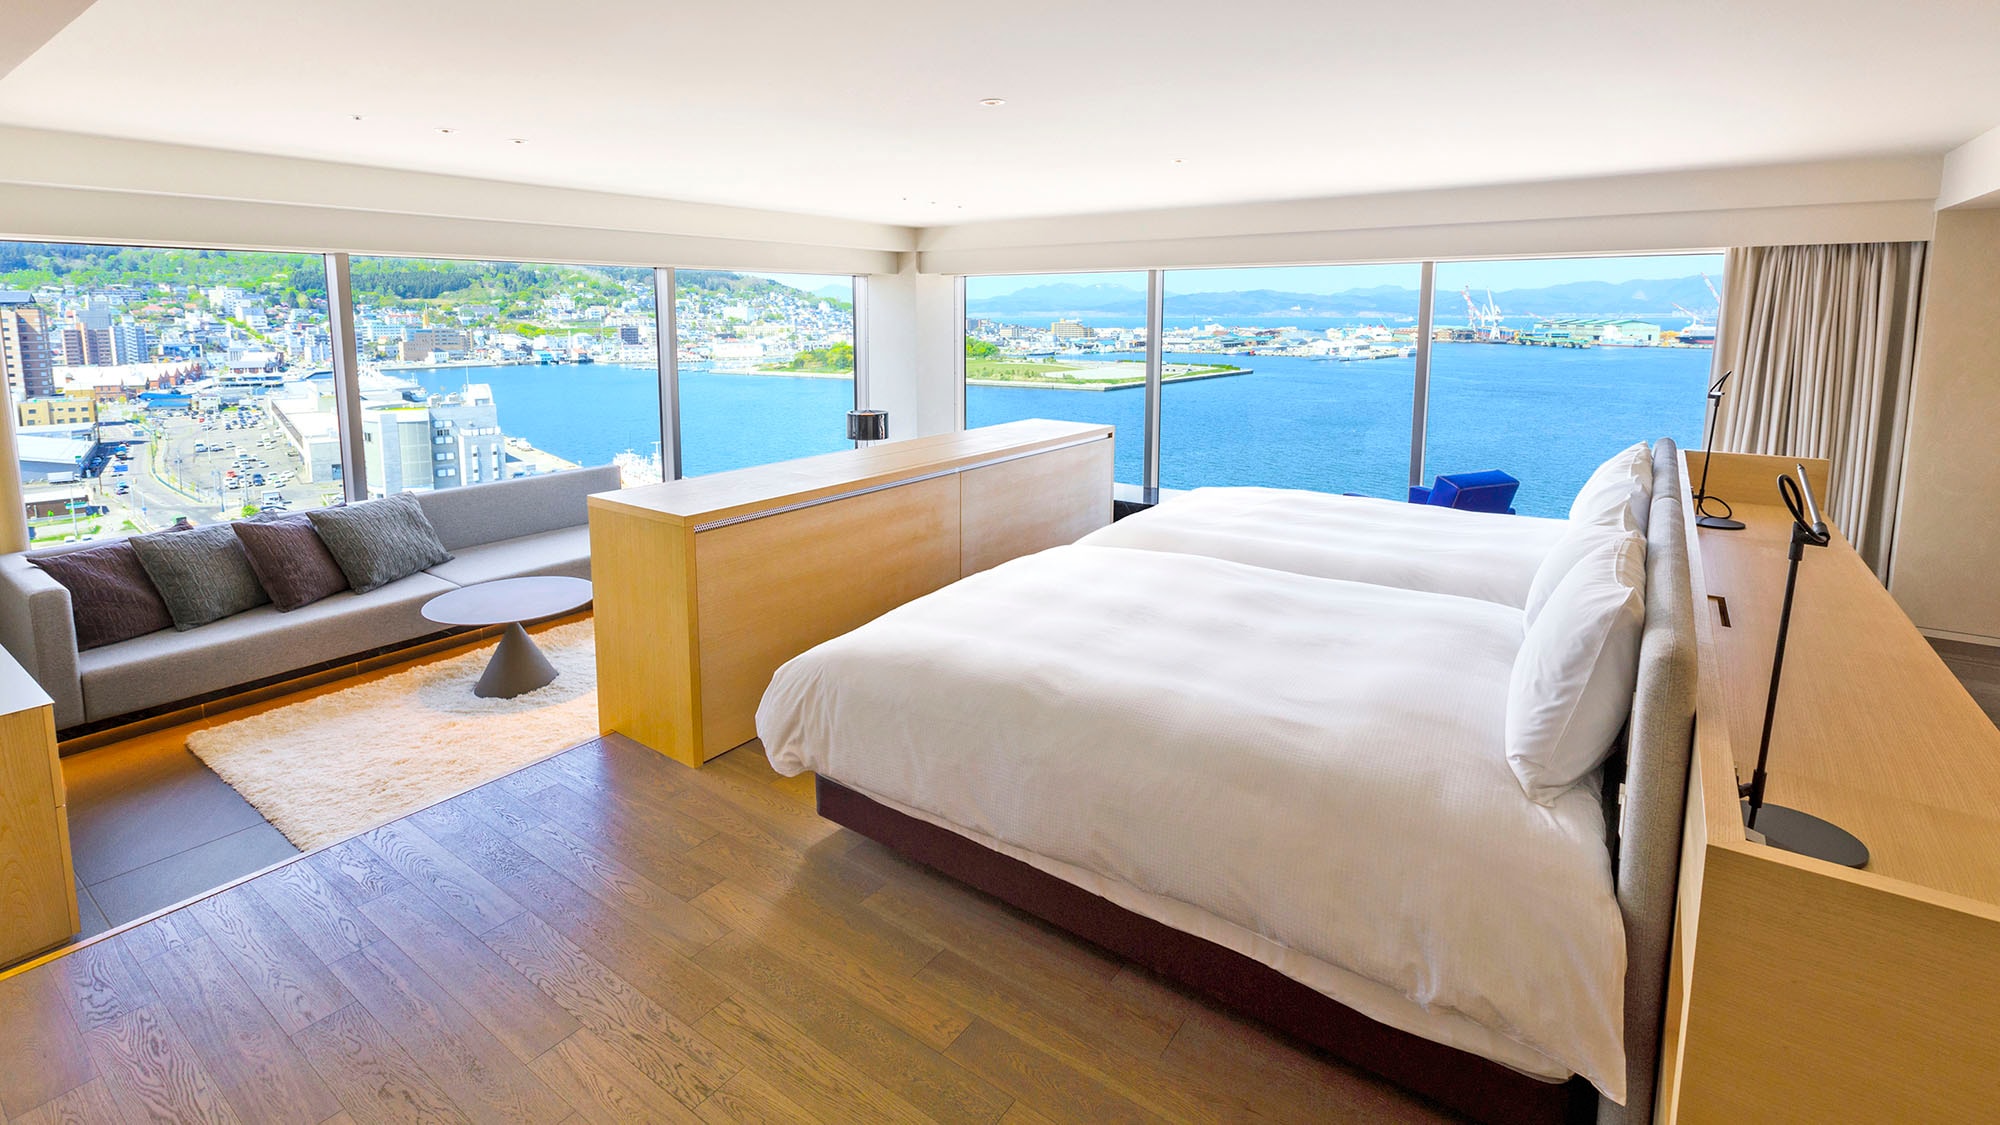 [Guest room] Royal Suite / 87㎡ / Guest room The beautiful view is monopolized on the top floor. The finest suite.